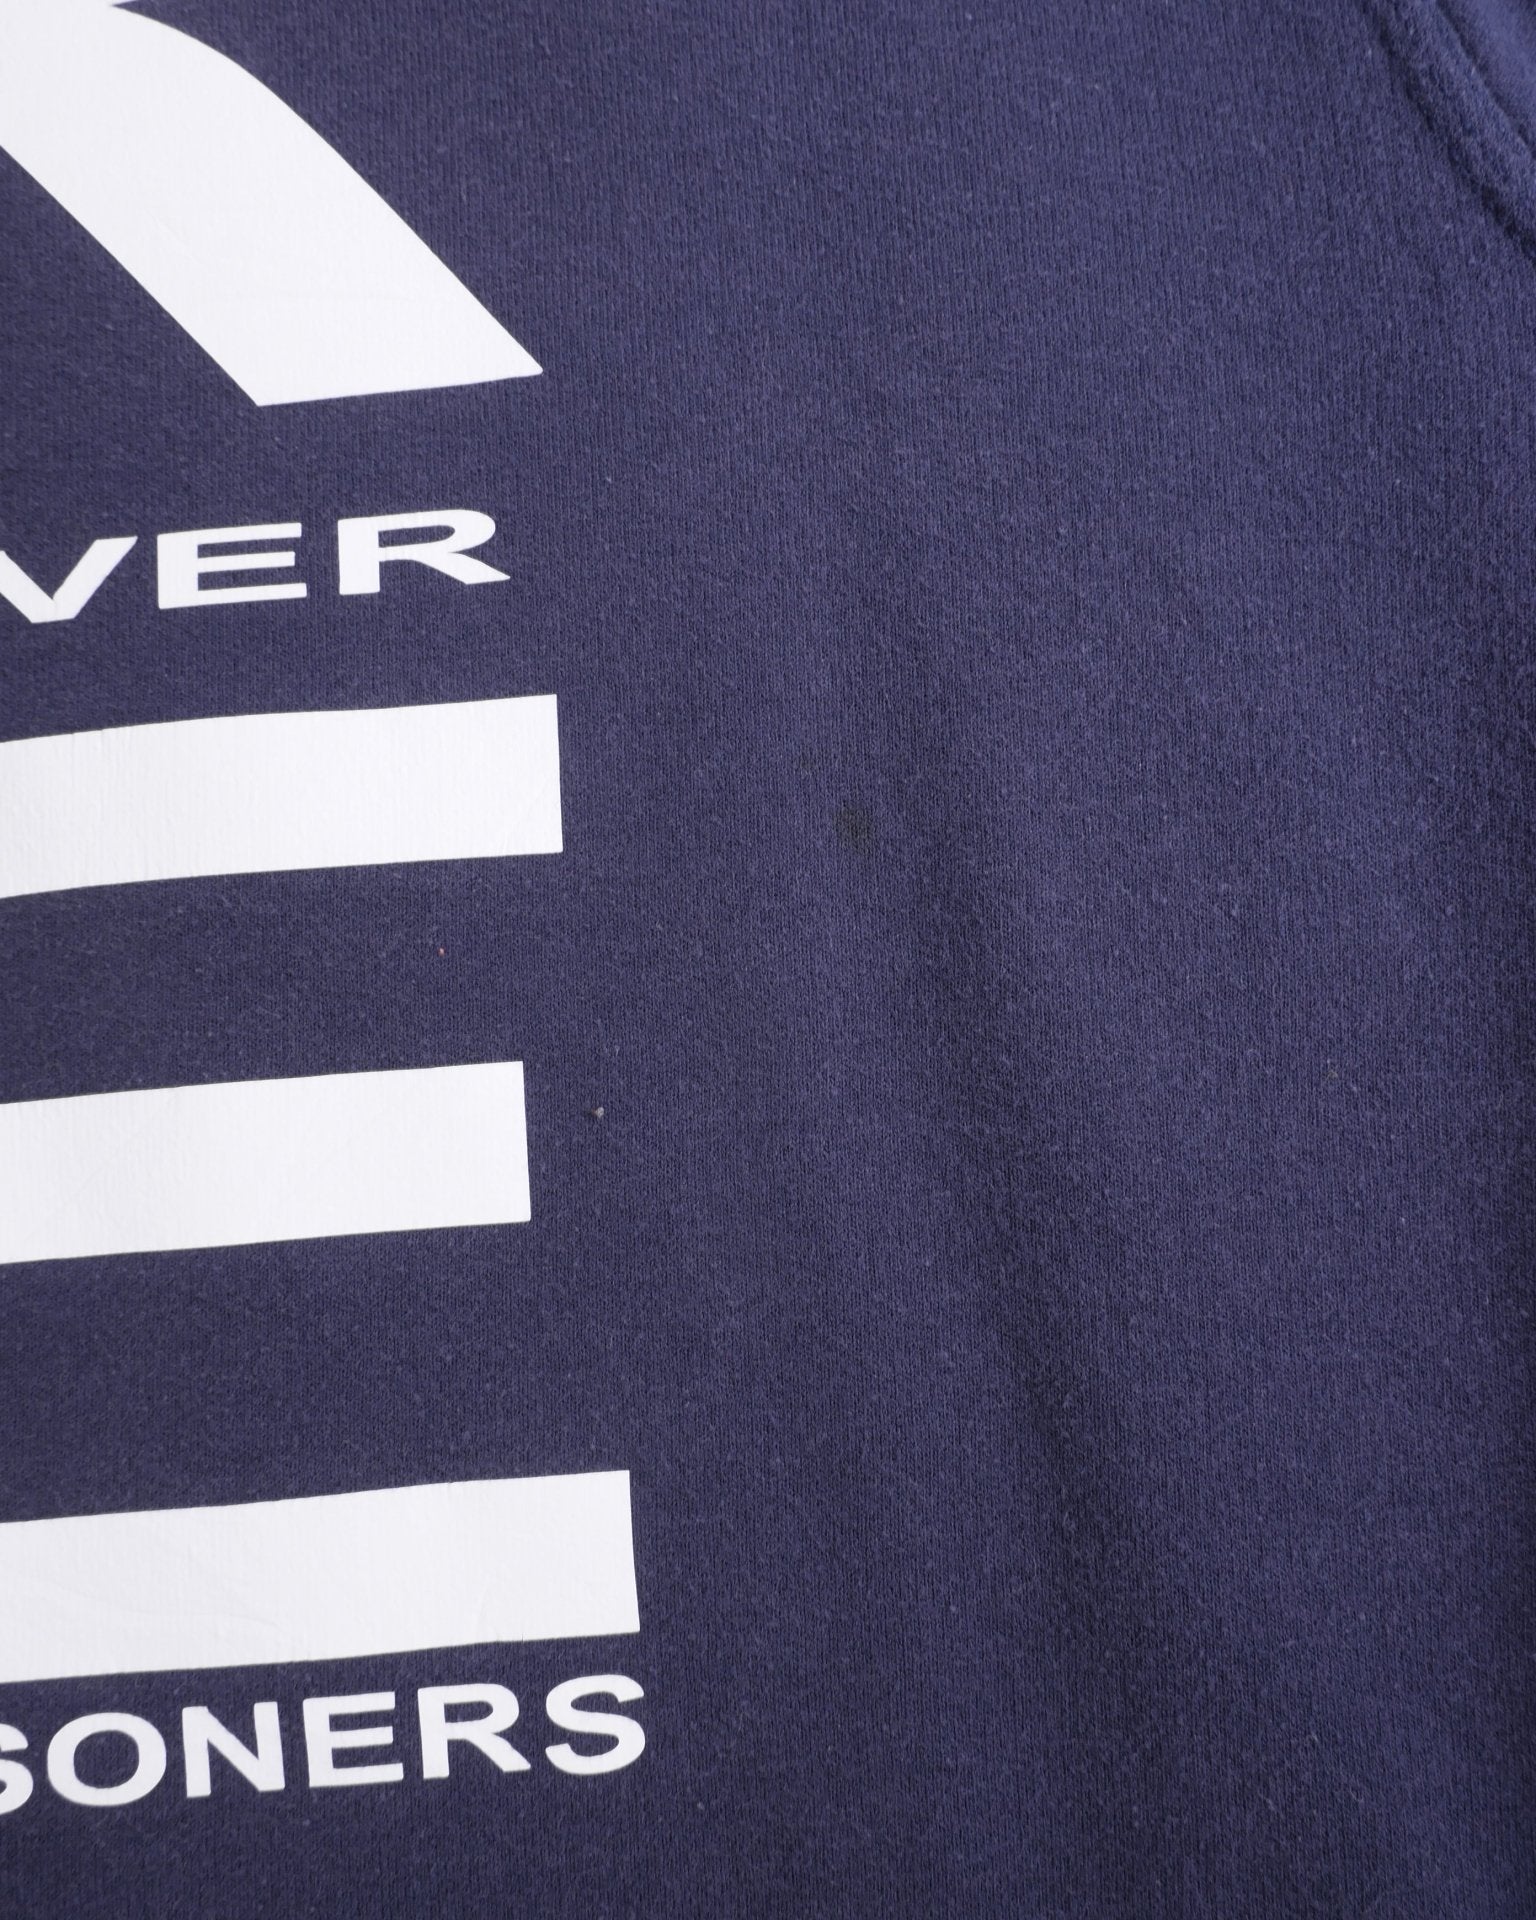 Champion 'Free Larry Hoover' printed Graphic navy Sweater - Peeces